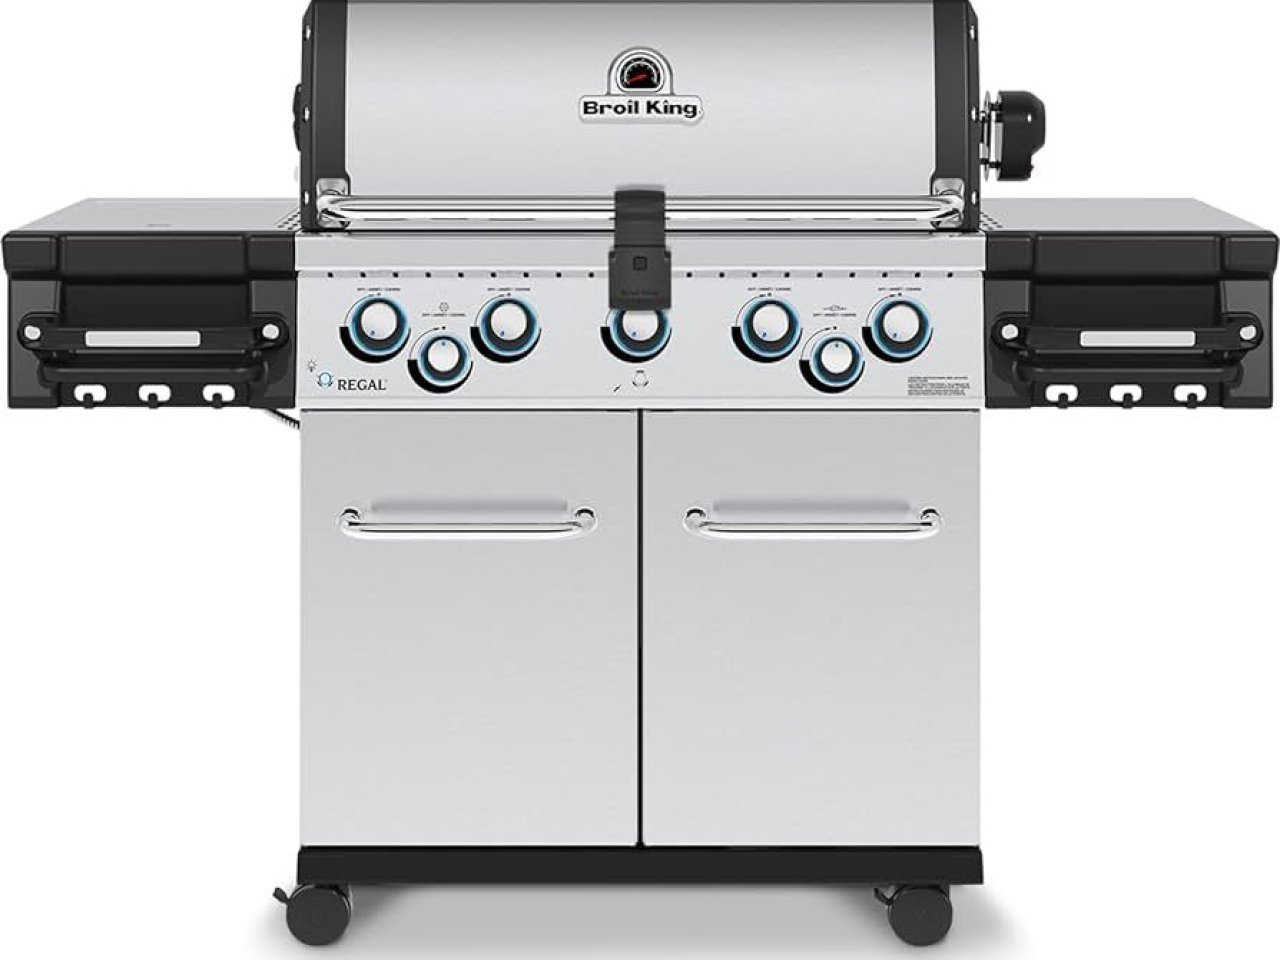 Barbecue Broil King mod. Regal - 3